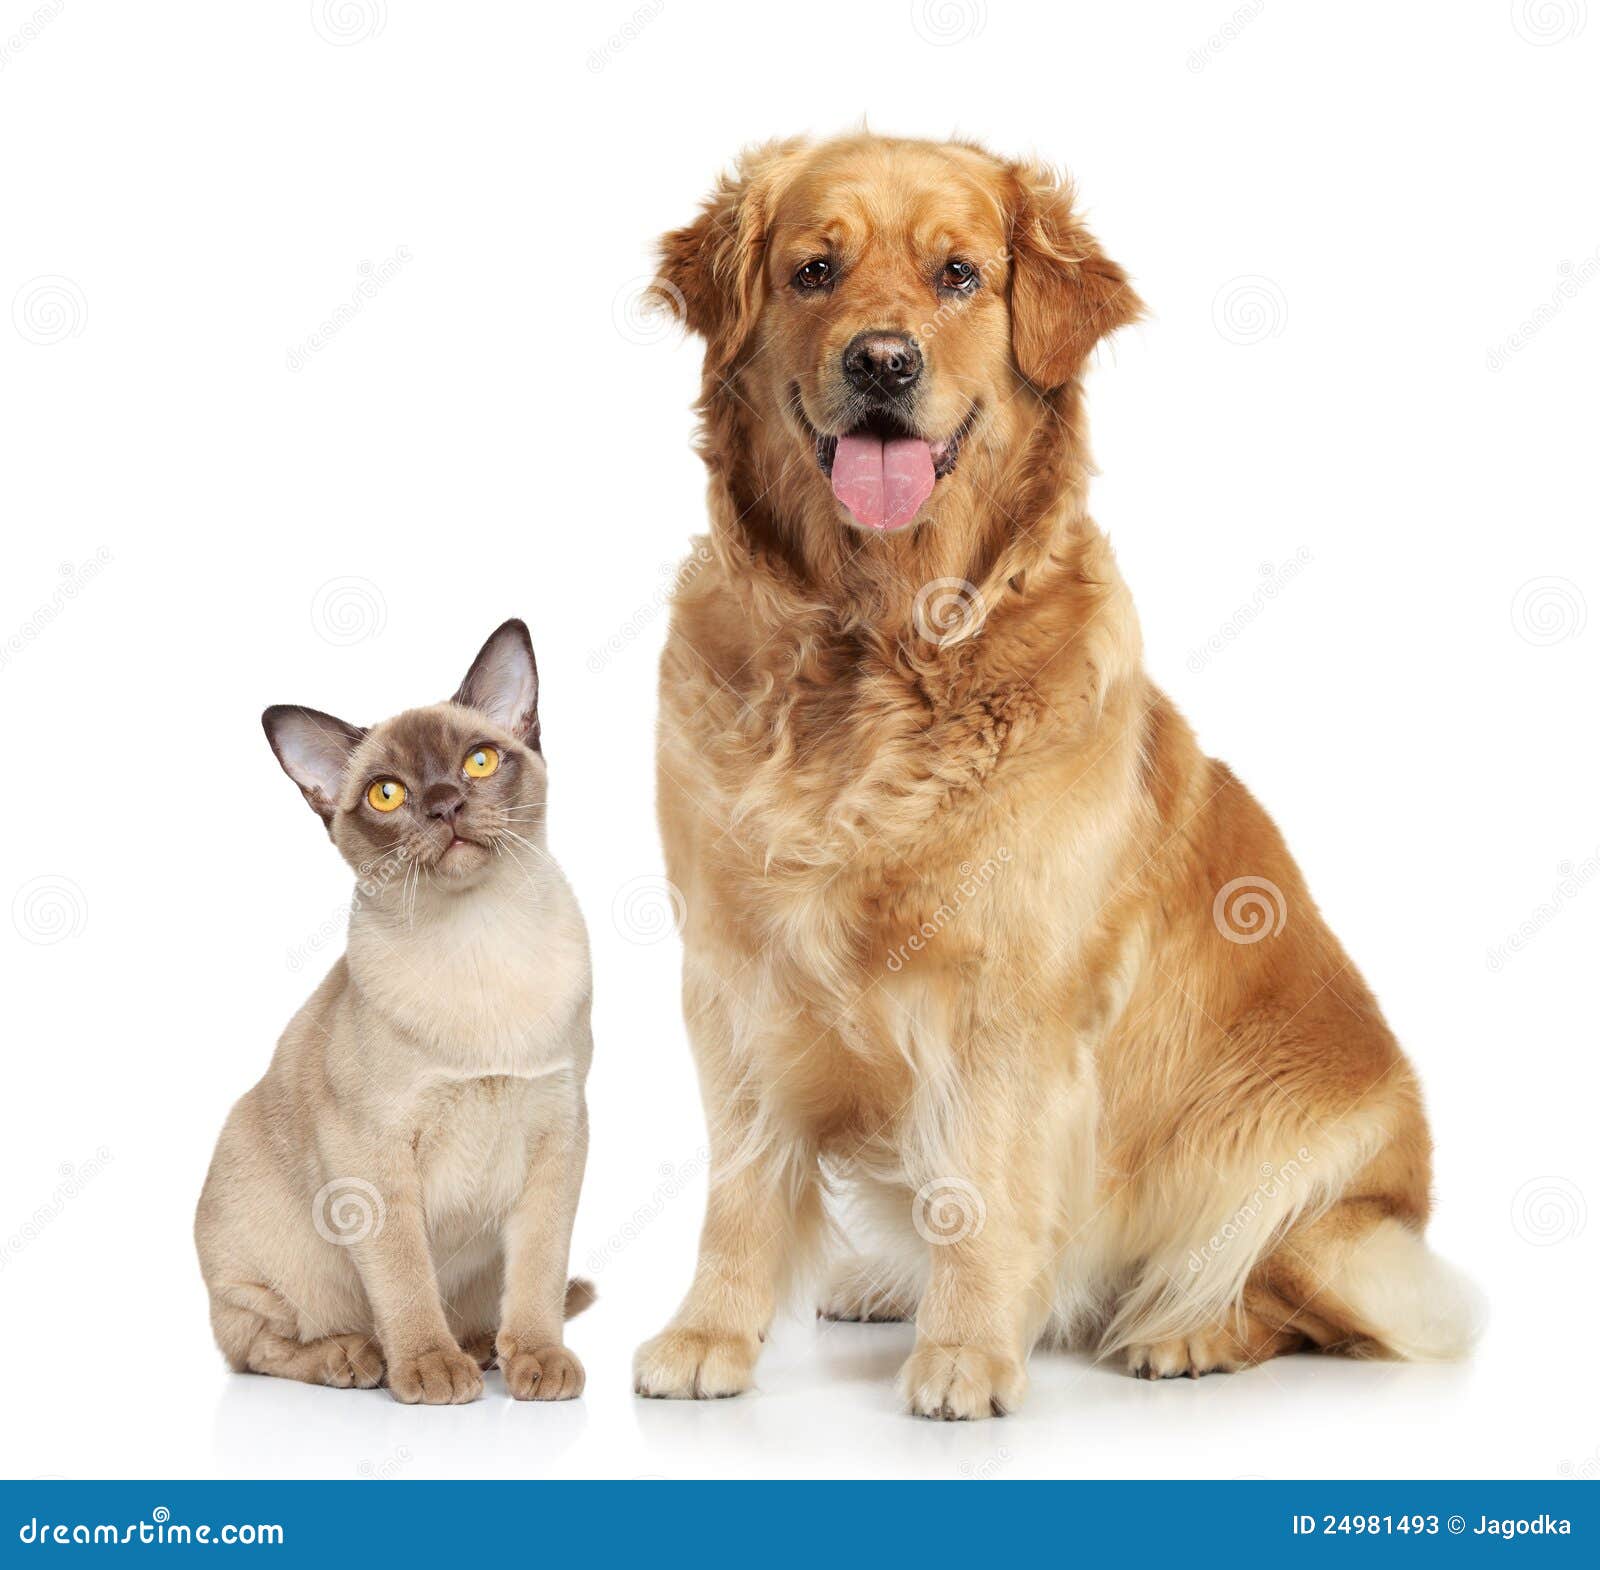 cat and dog on a white background